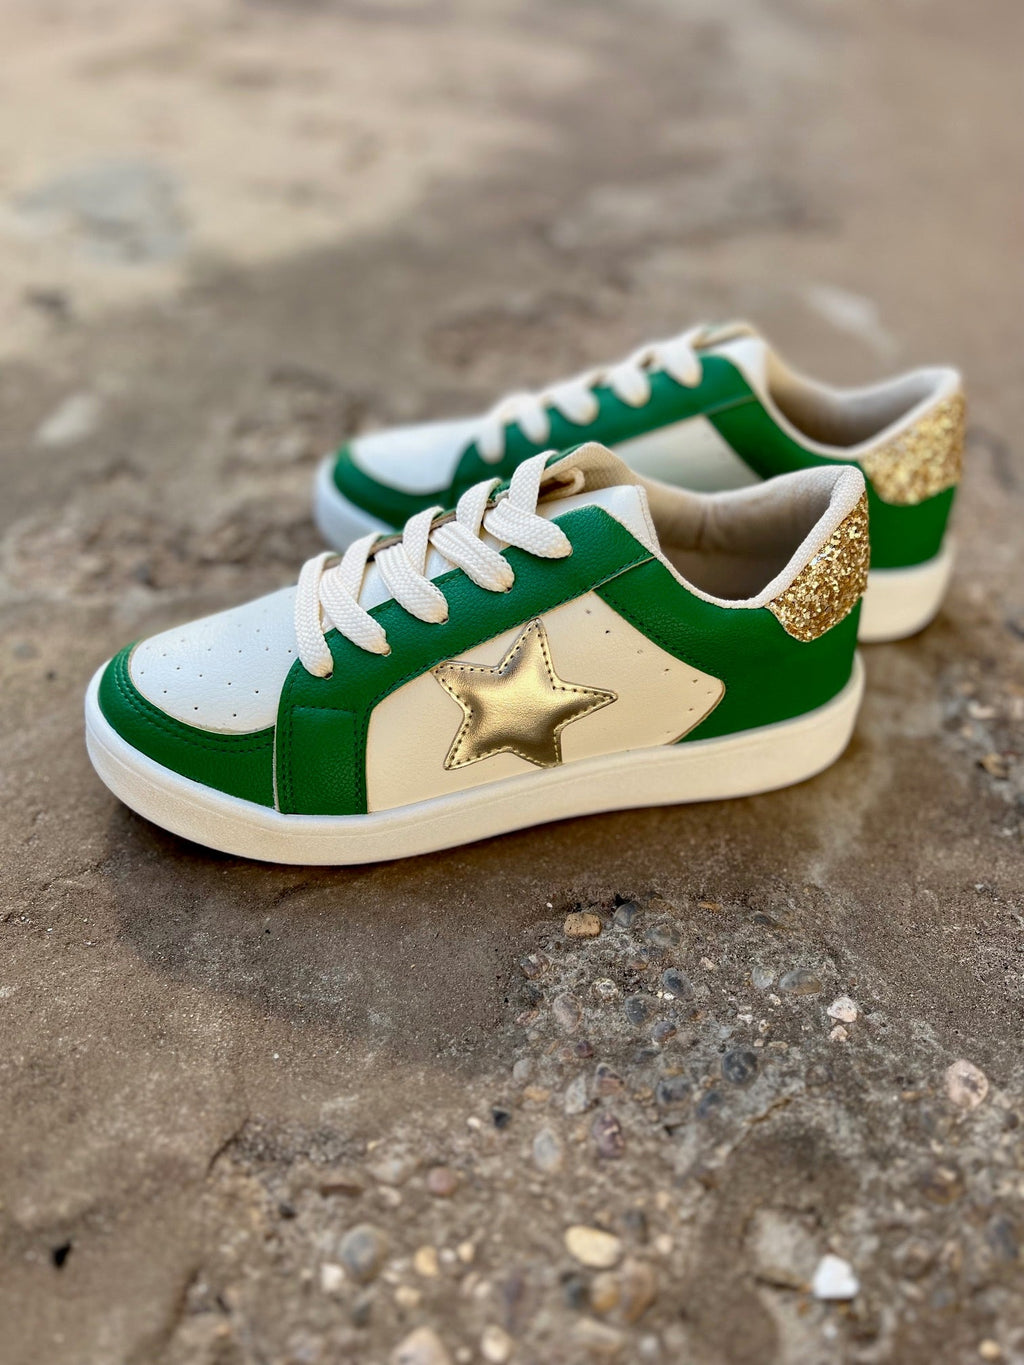 Green & Gold Game Day Sneakers | gussieduponline